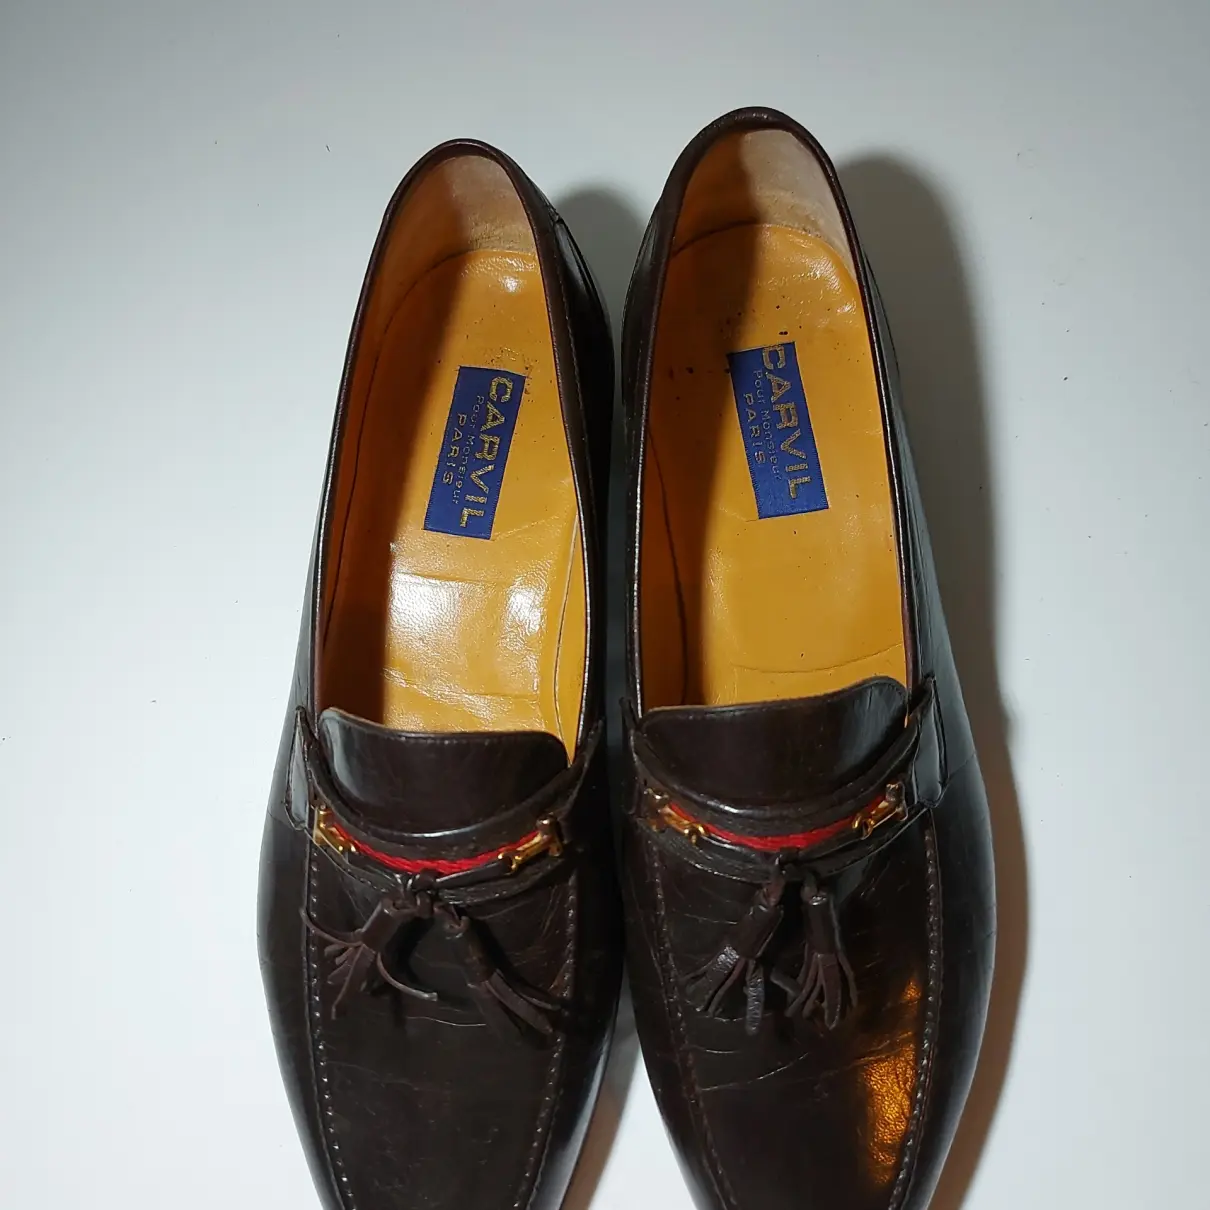 Buy Carvil Leather flats online